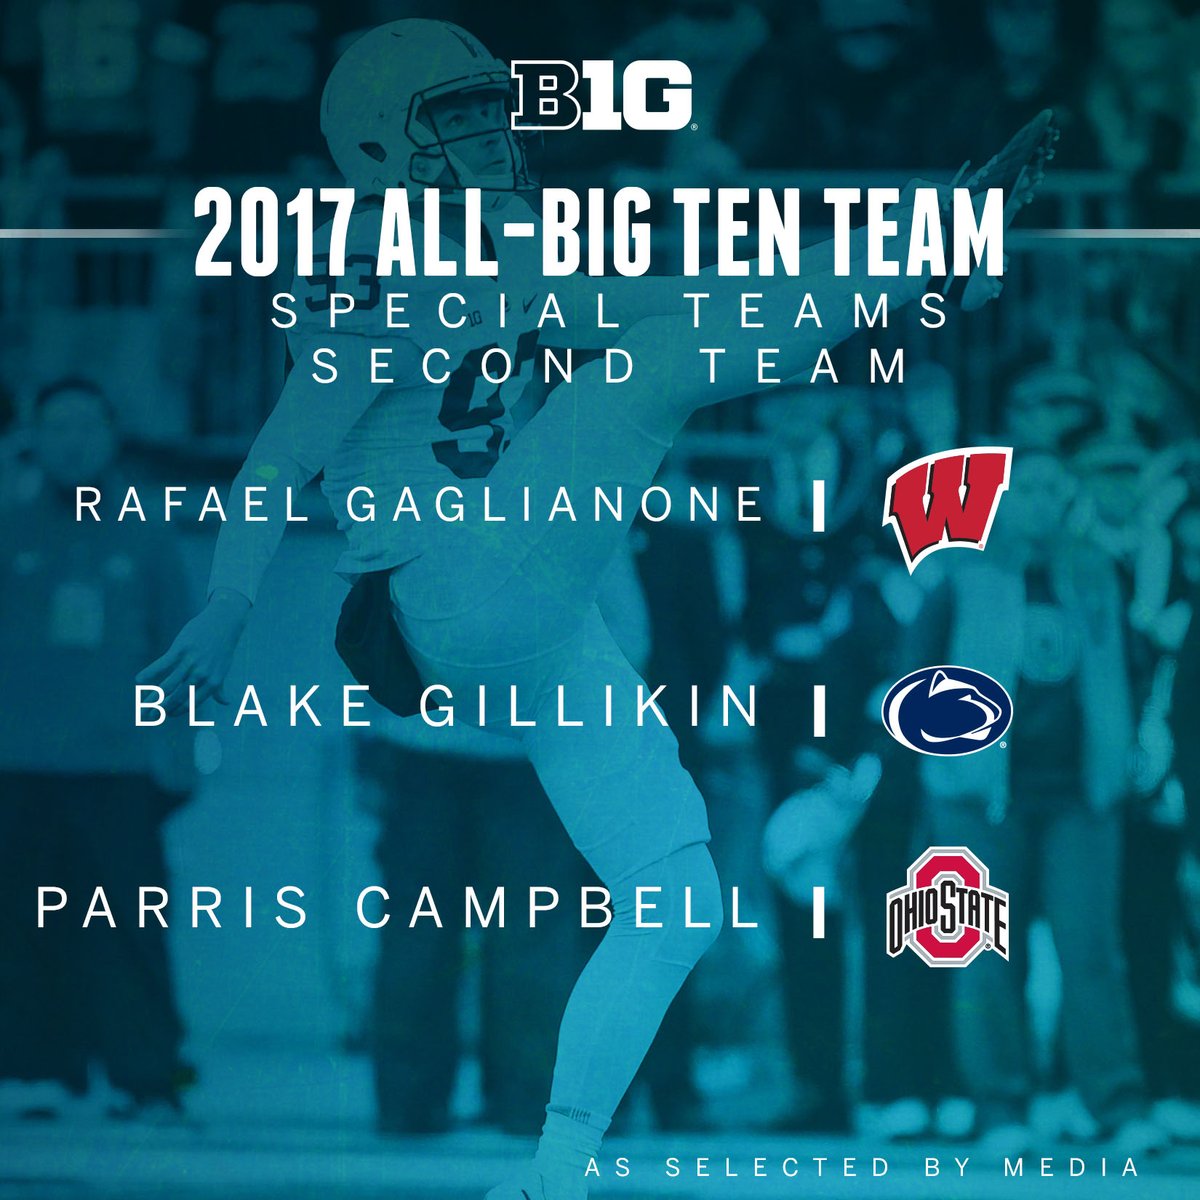 All-Big Ten Special Teams Second Team, as selected by media